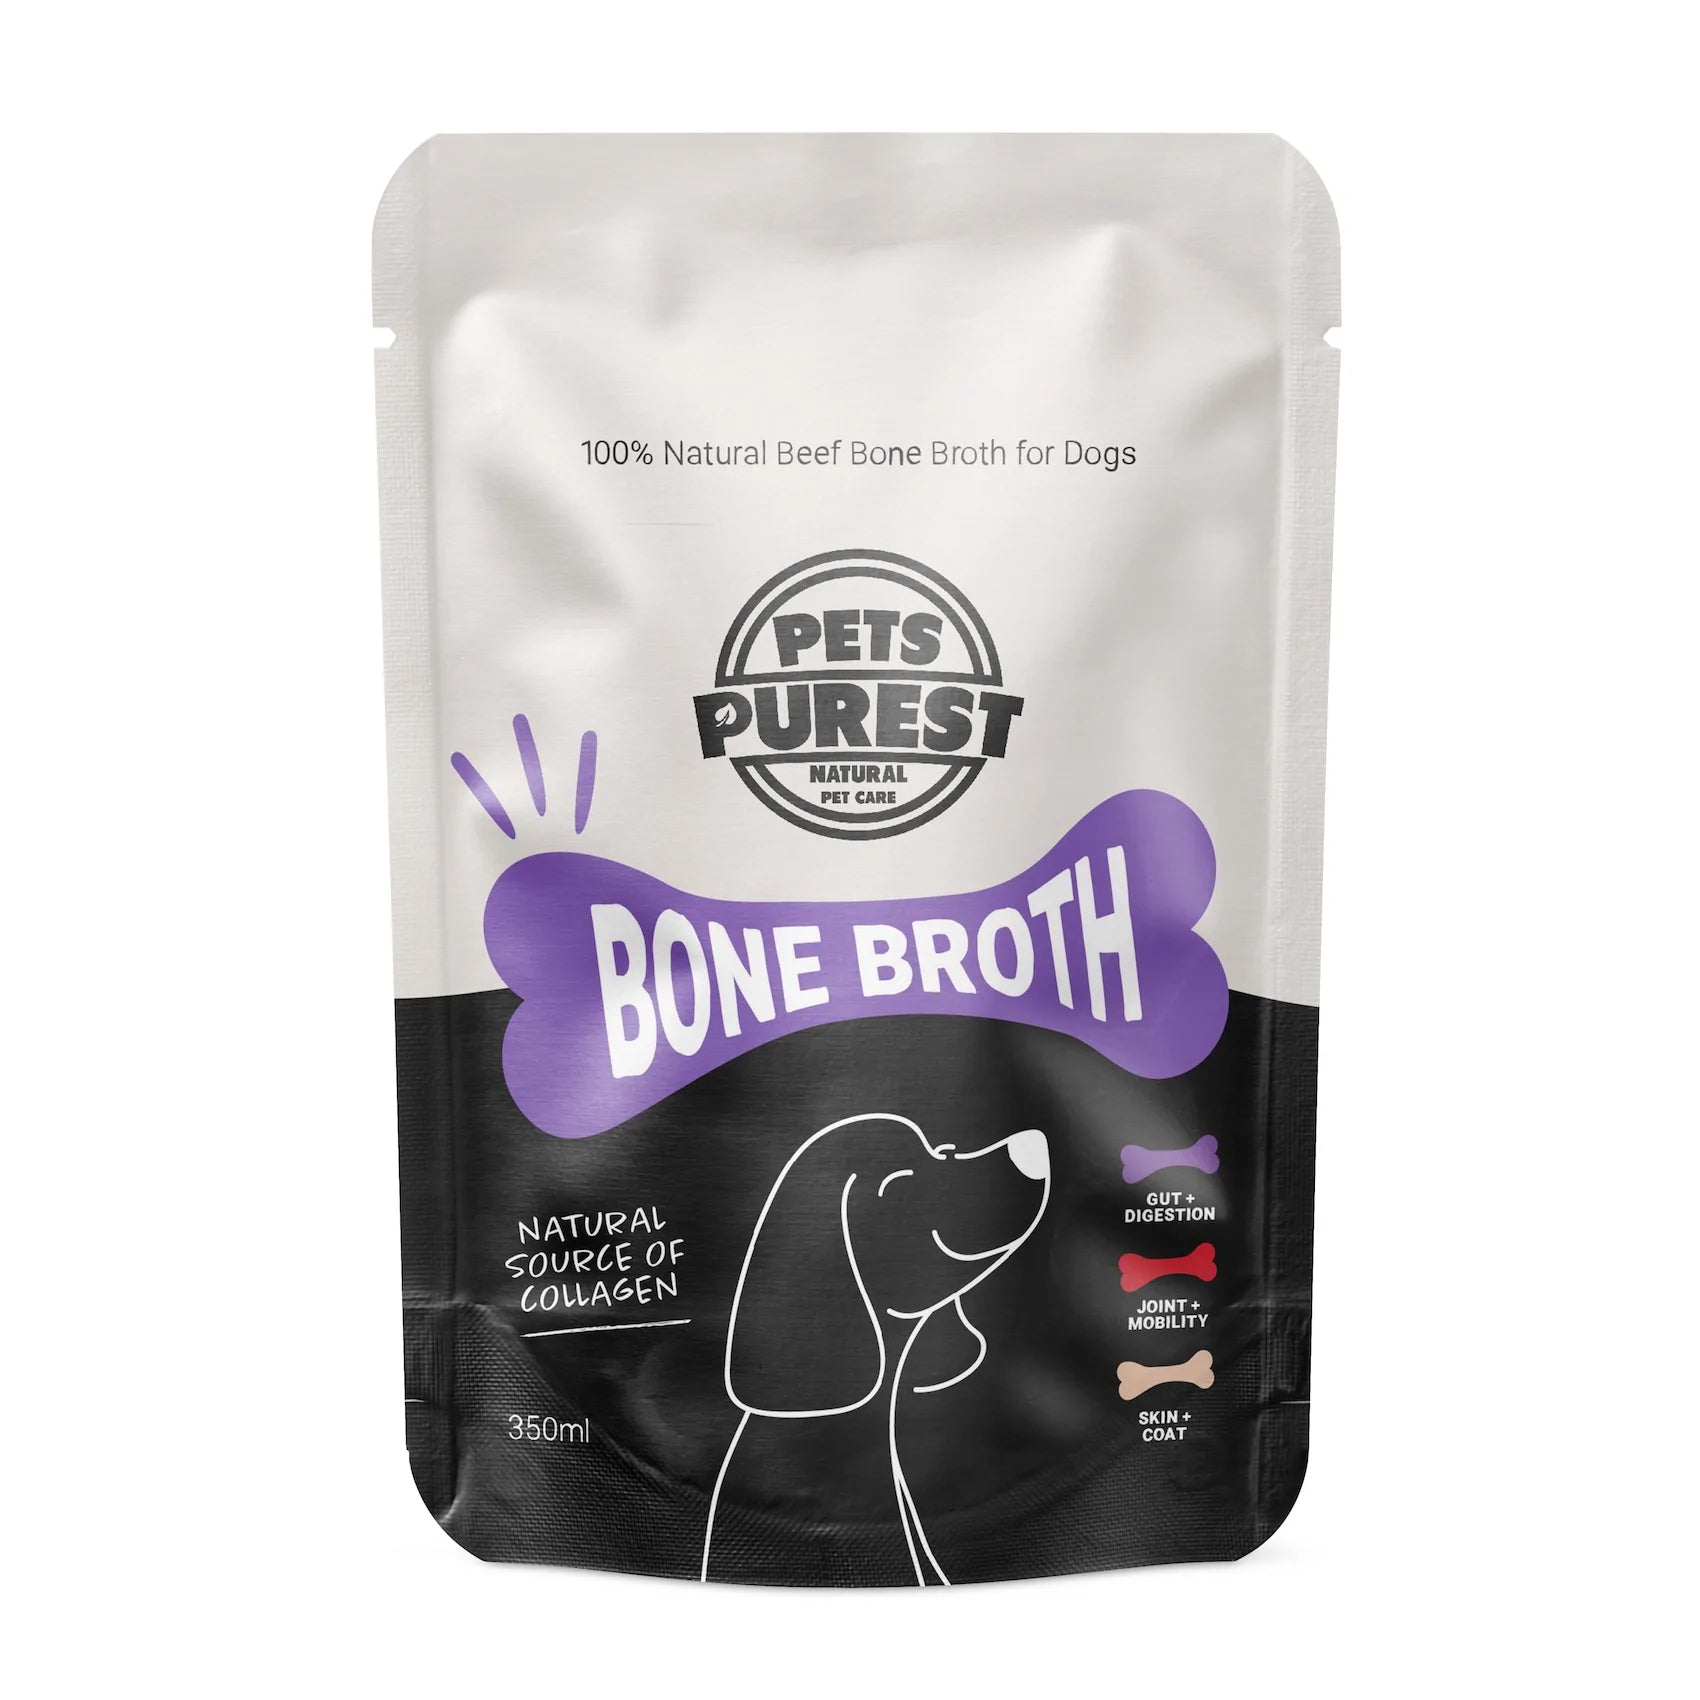 Pets Purest Beef Bone Broth For Dogs 350ml Pack of 3